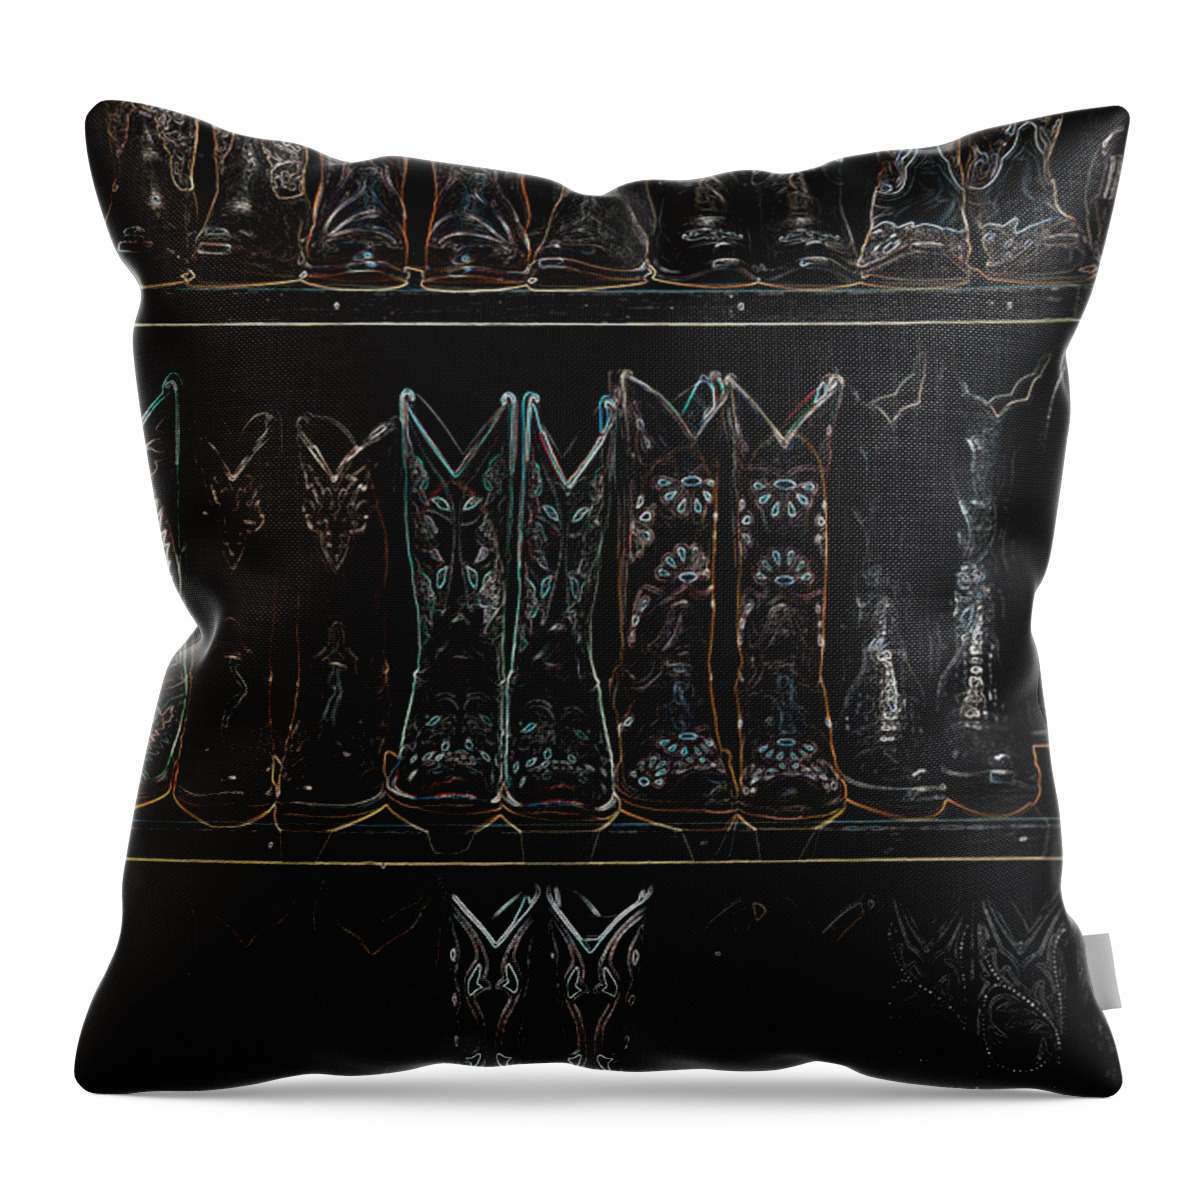 Southwestern Throw Pillow featuring the digital art These Boots Are Made For Walking 2 by Jani Freimann